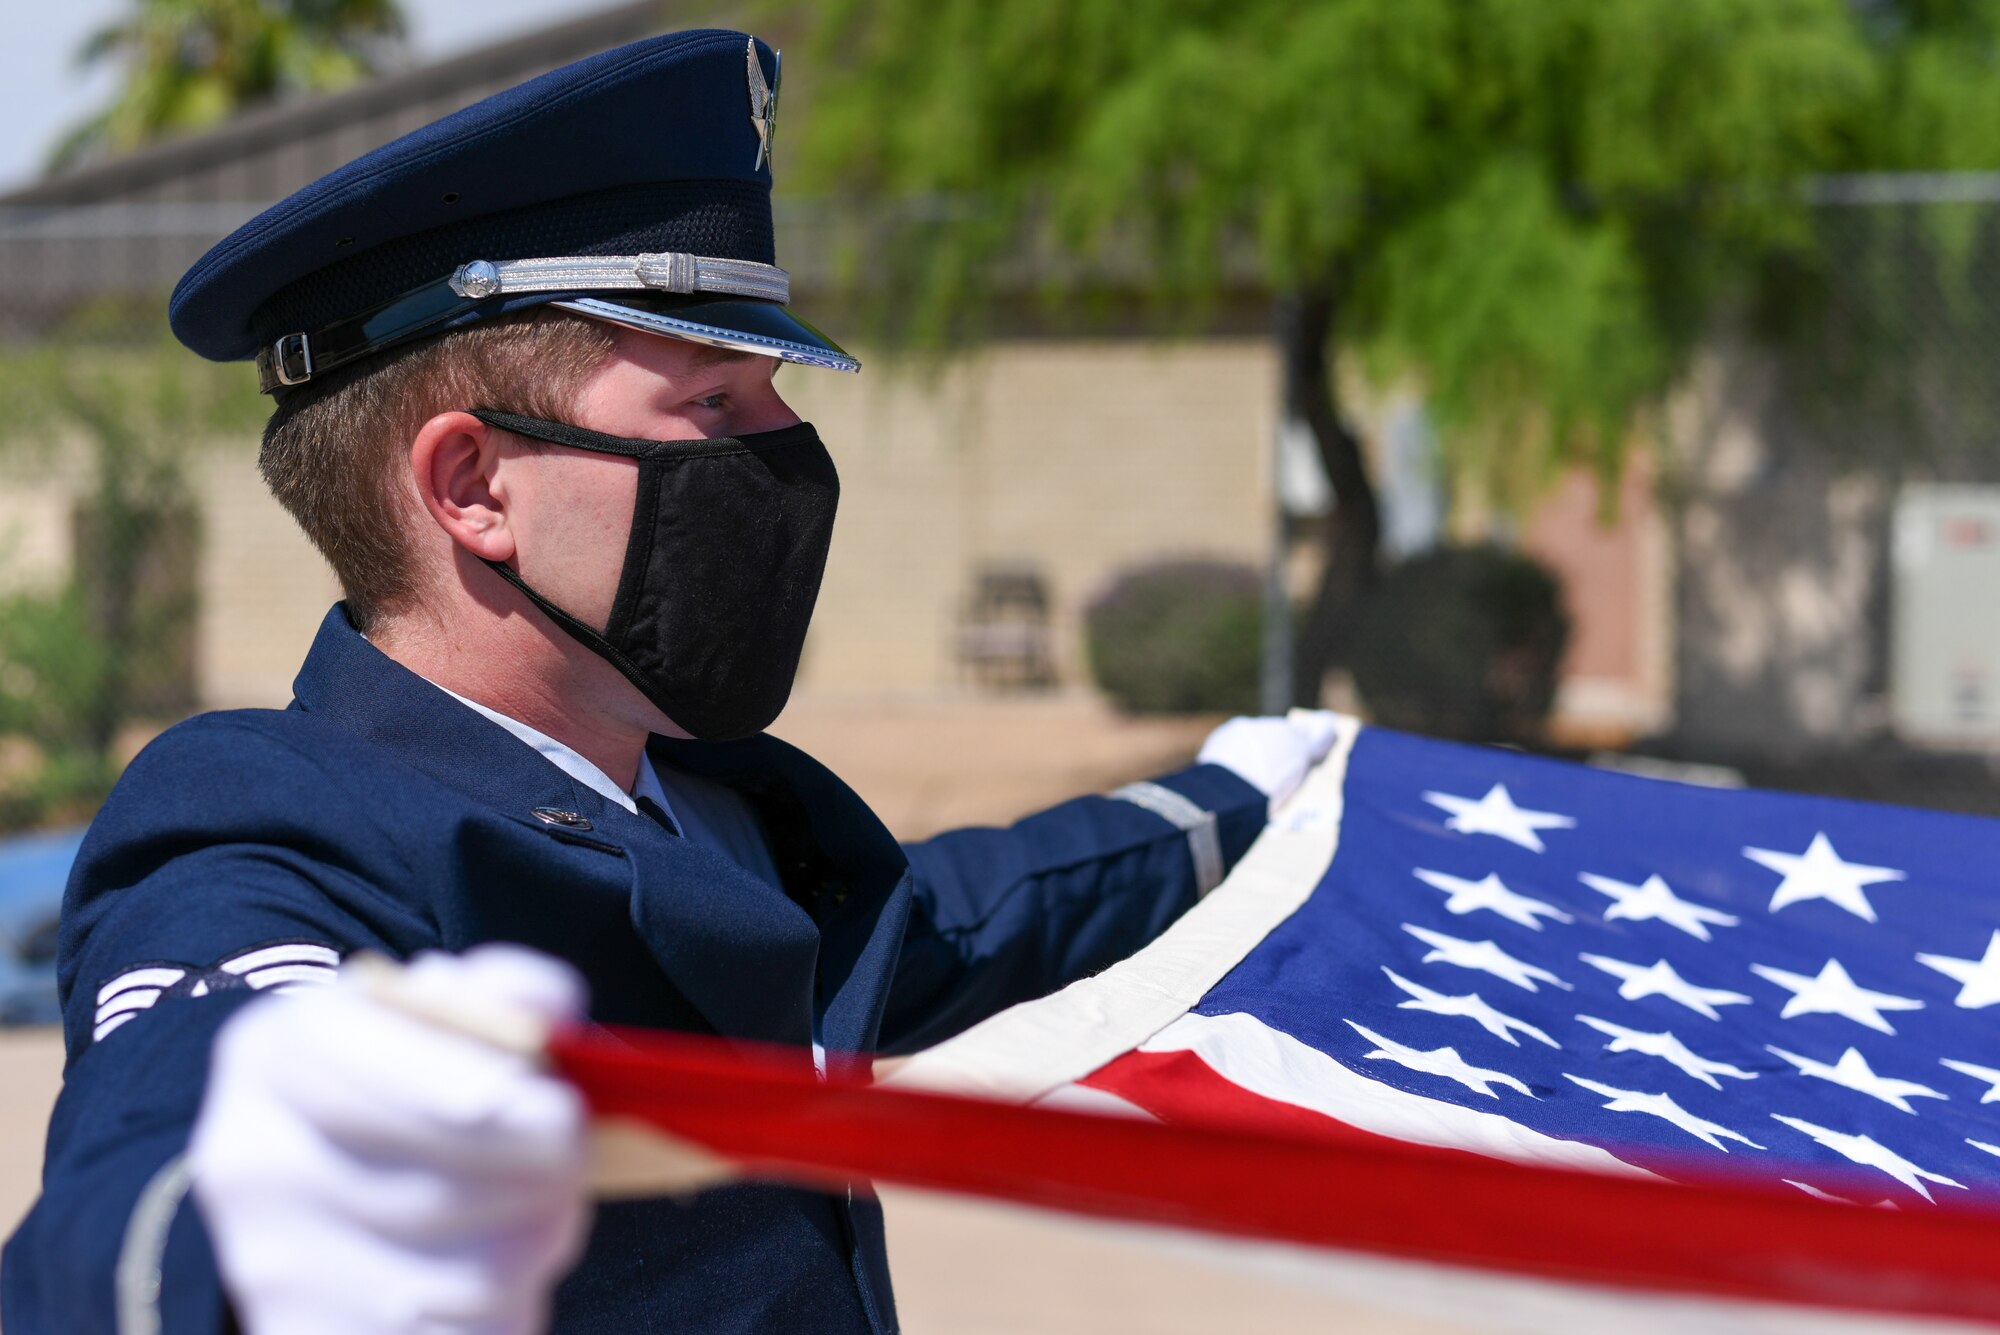 U.S. Air Force Senior Airman Blake Davidson, 56th Fighter Wing ceremonial guardsman, displays the American flag during a flag folding ceremony July 28, 2021, at Luke Air Force Base, Arizona. The Luke AFB Honor Guard is responsible for a large amount of Arizona’s ceremonies, providing coverage to six different counties. The base honor guard’s primary mission is to provide military funeral honors for active-duty members as well as retirees and veterans who served honorably in the U.S. Air Force and Army Air Corps. (U.S. Air Force photo by Senior Airman Caleb F. Butler)